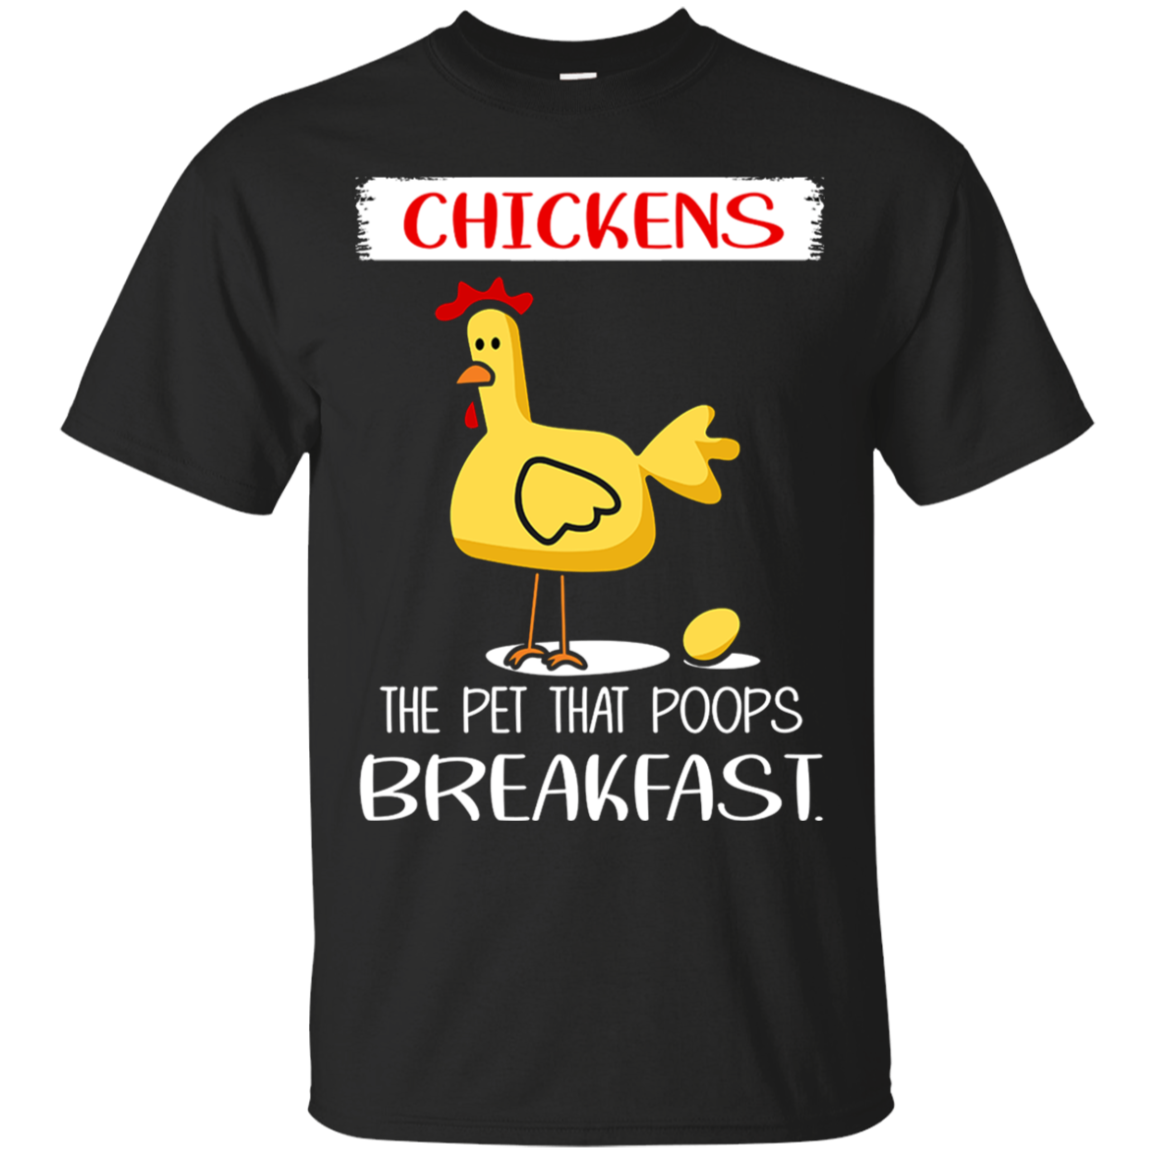 Chickens The Pet That Poops Breakfast Camping Shirt G200 Gildan Ultra ...